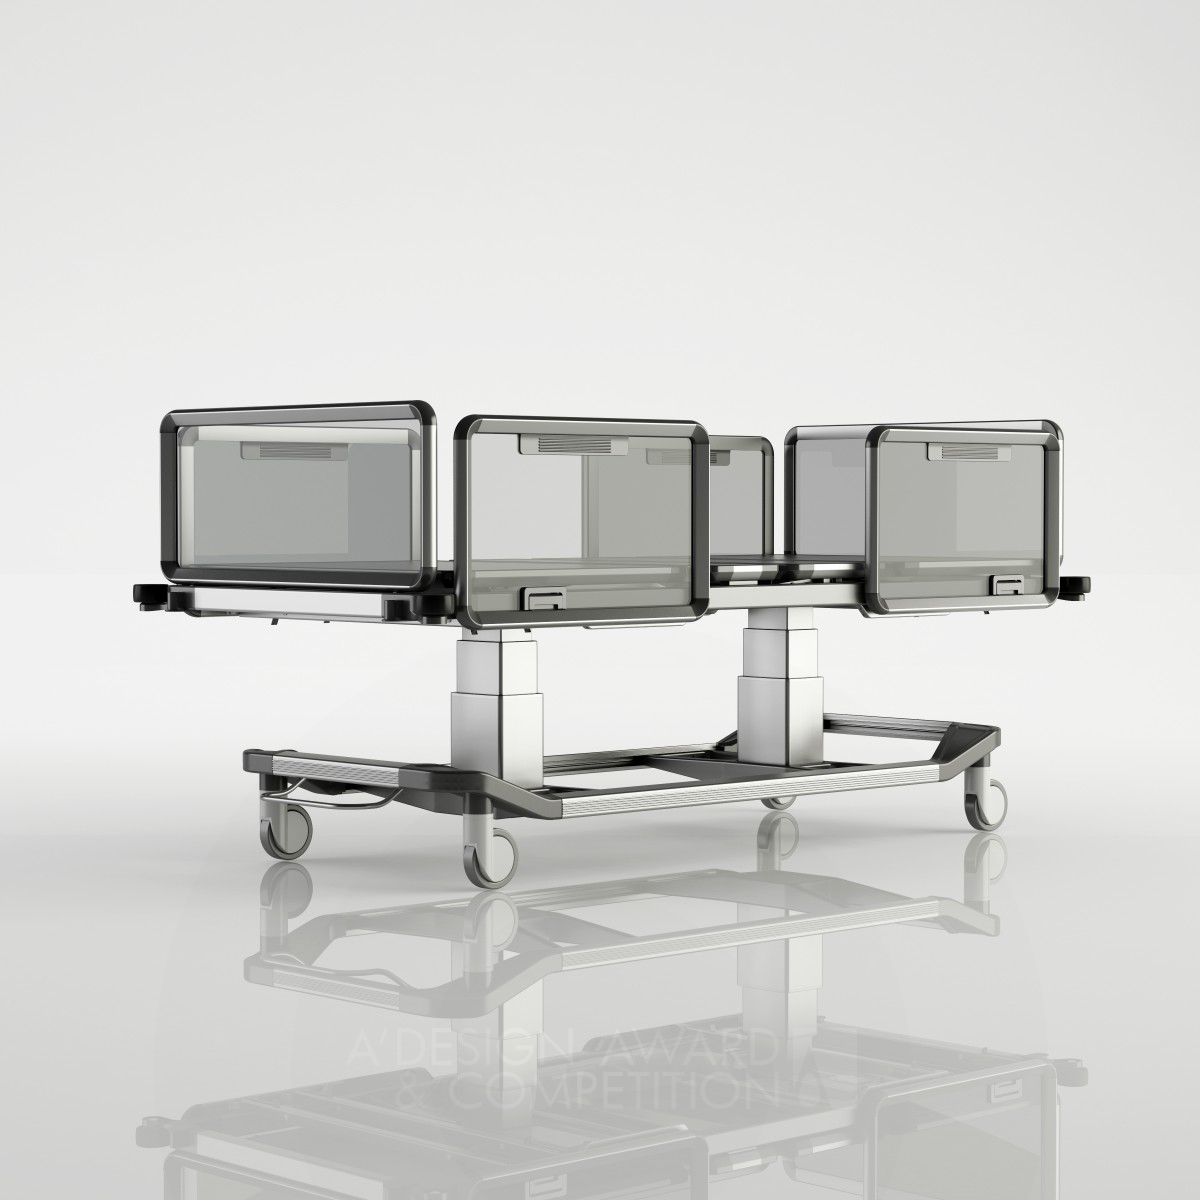 Eryigit Hospital Bed by Hakan Gürsu Bronze Medical Devices and Medical Equipment Design Award Winner 2015 